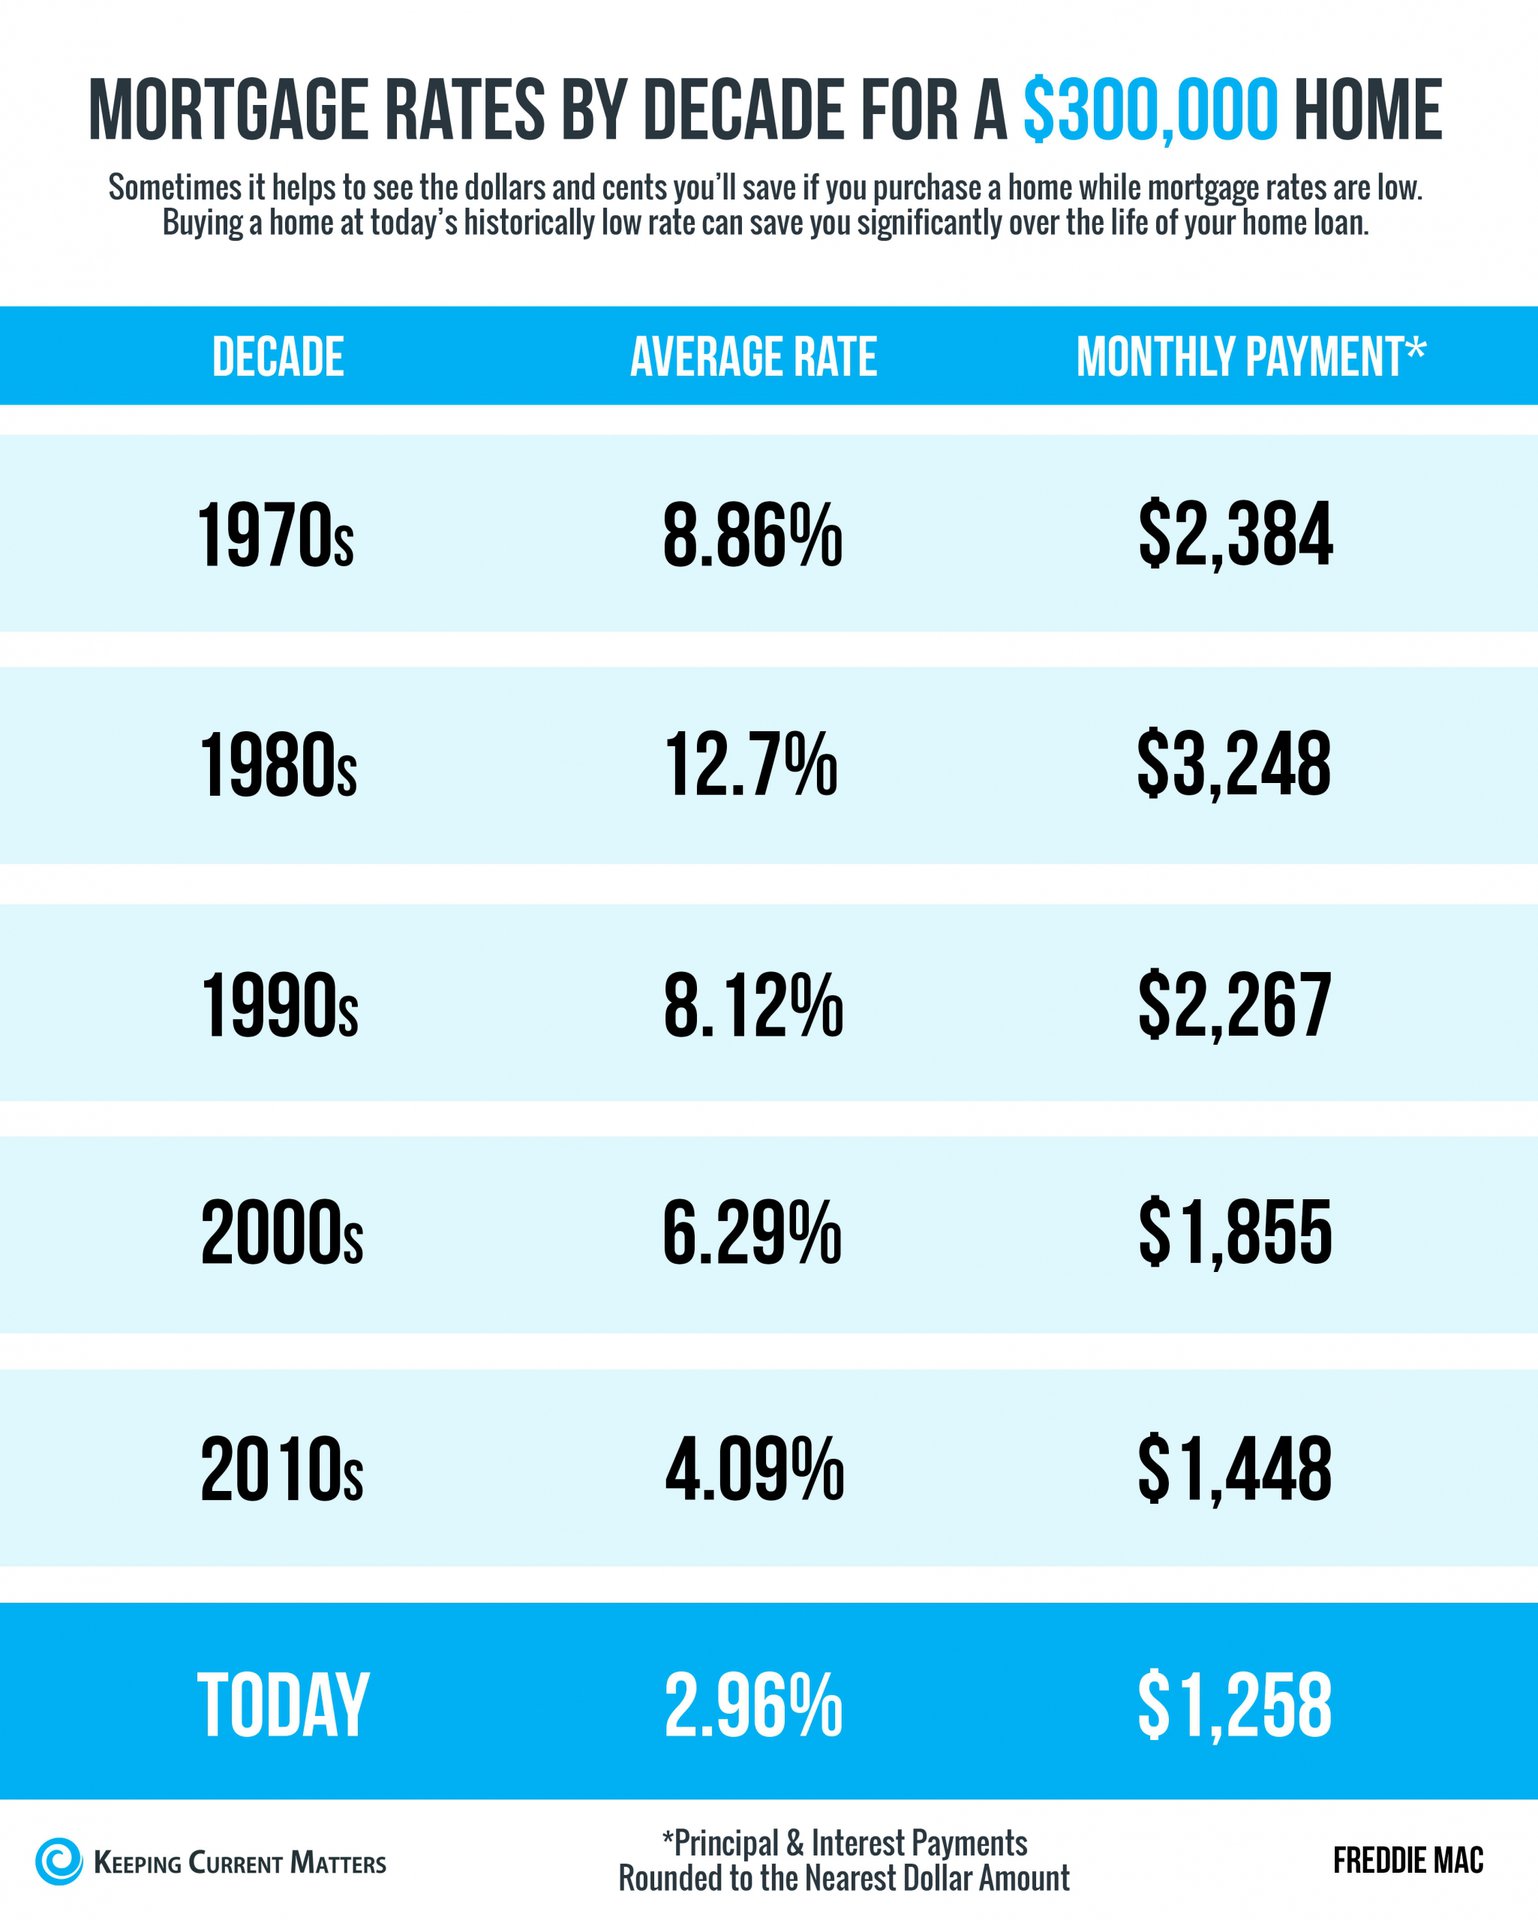 Mortgage Rates & Payments by Decade [INFOGRAPHIC] | Keeping Current Matters